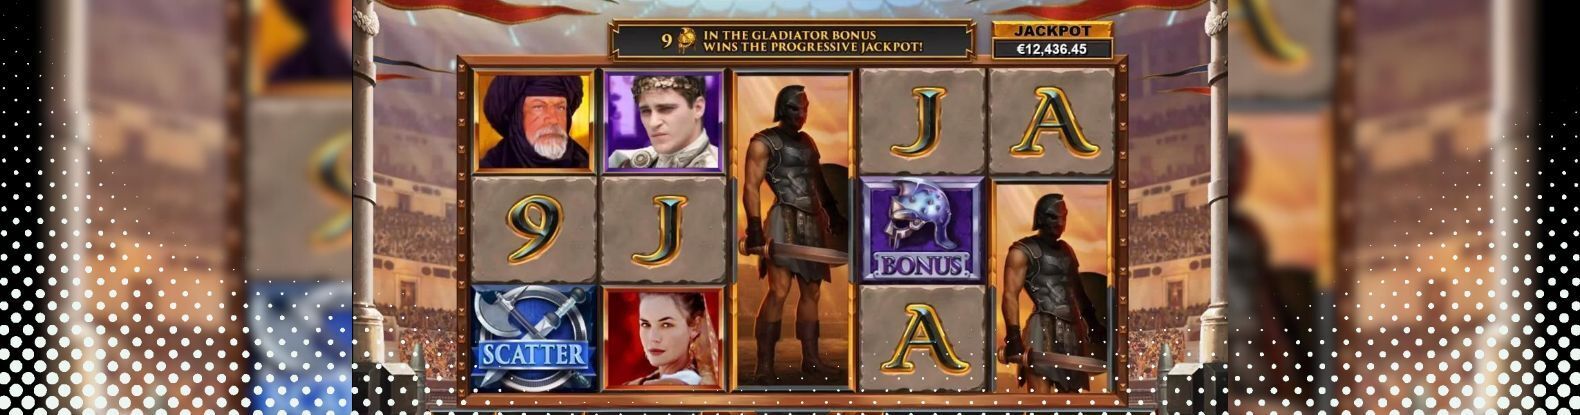 This is a screenshot of Gladiator: Road to Rome Online Pokies Game by Playtech